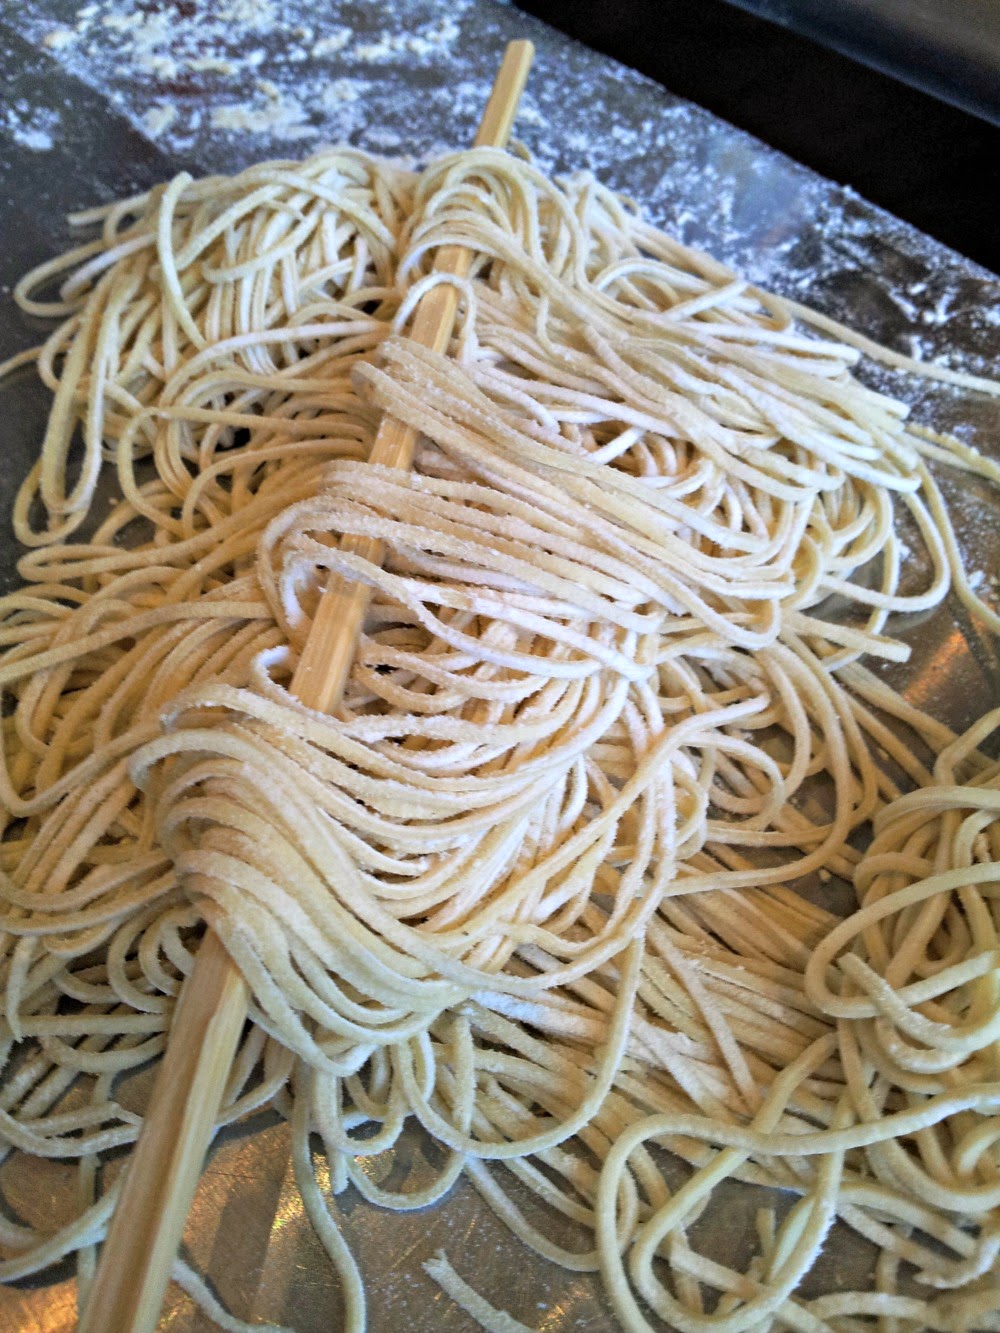 Southern Chat: Learning to make ramen noodles at Torii ...